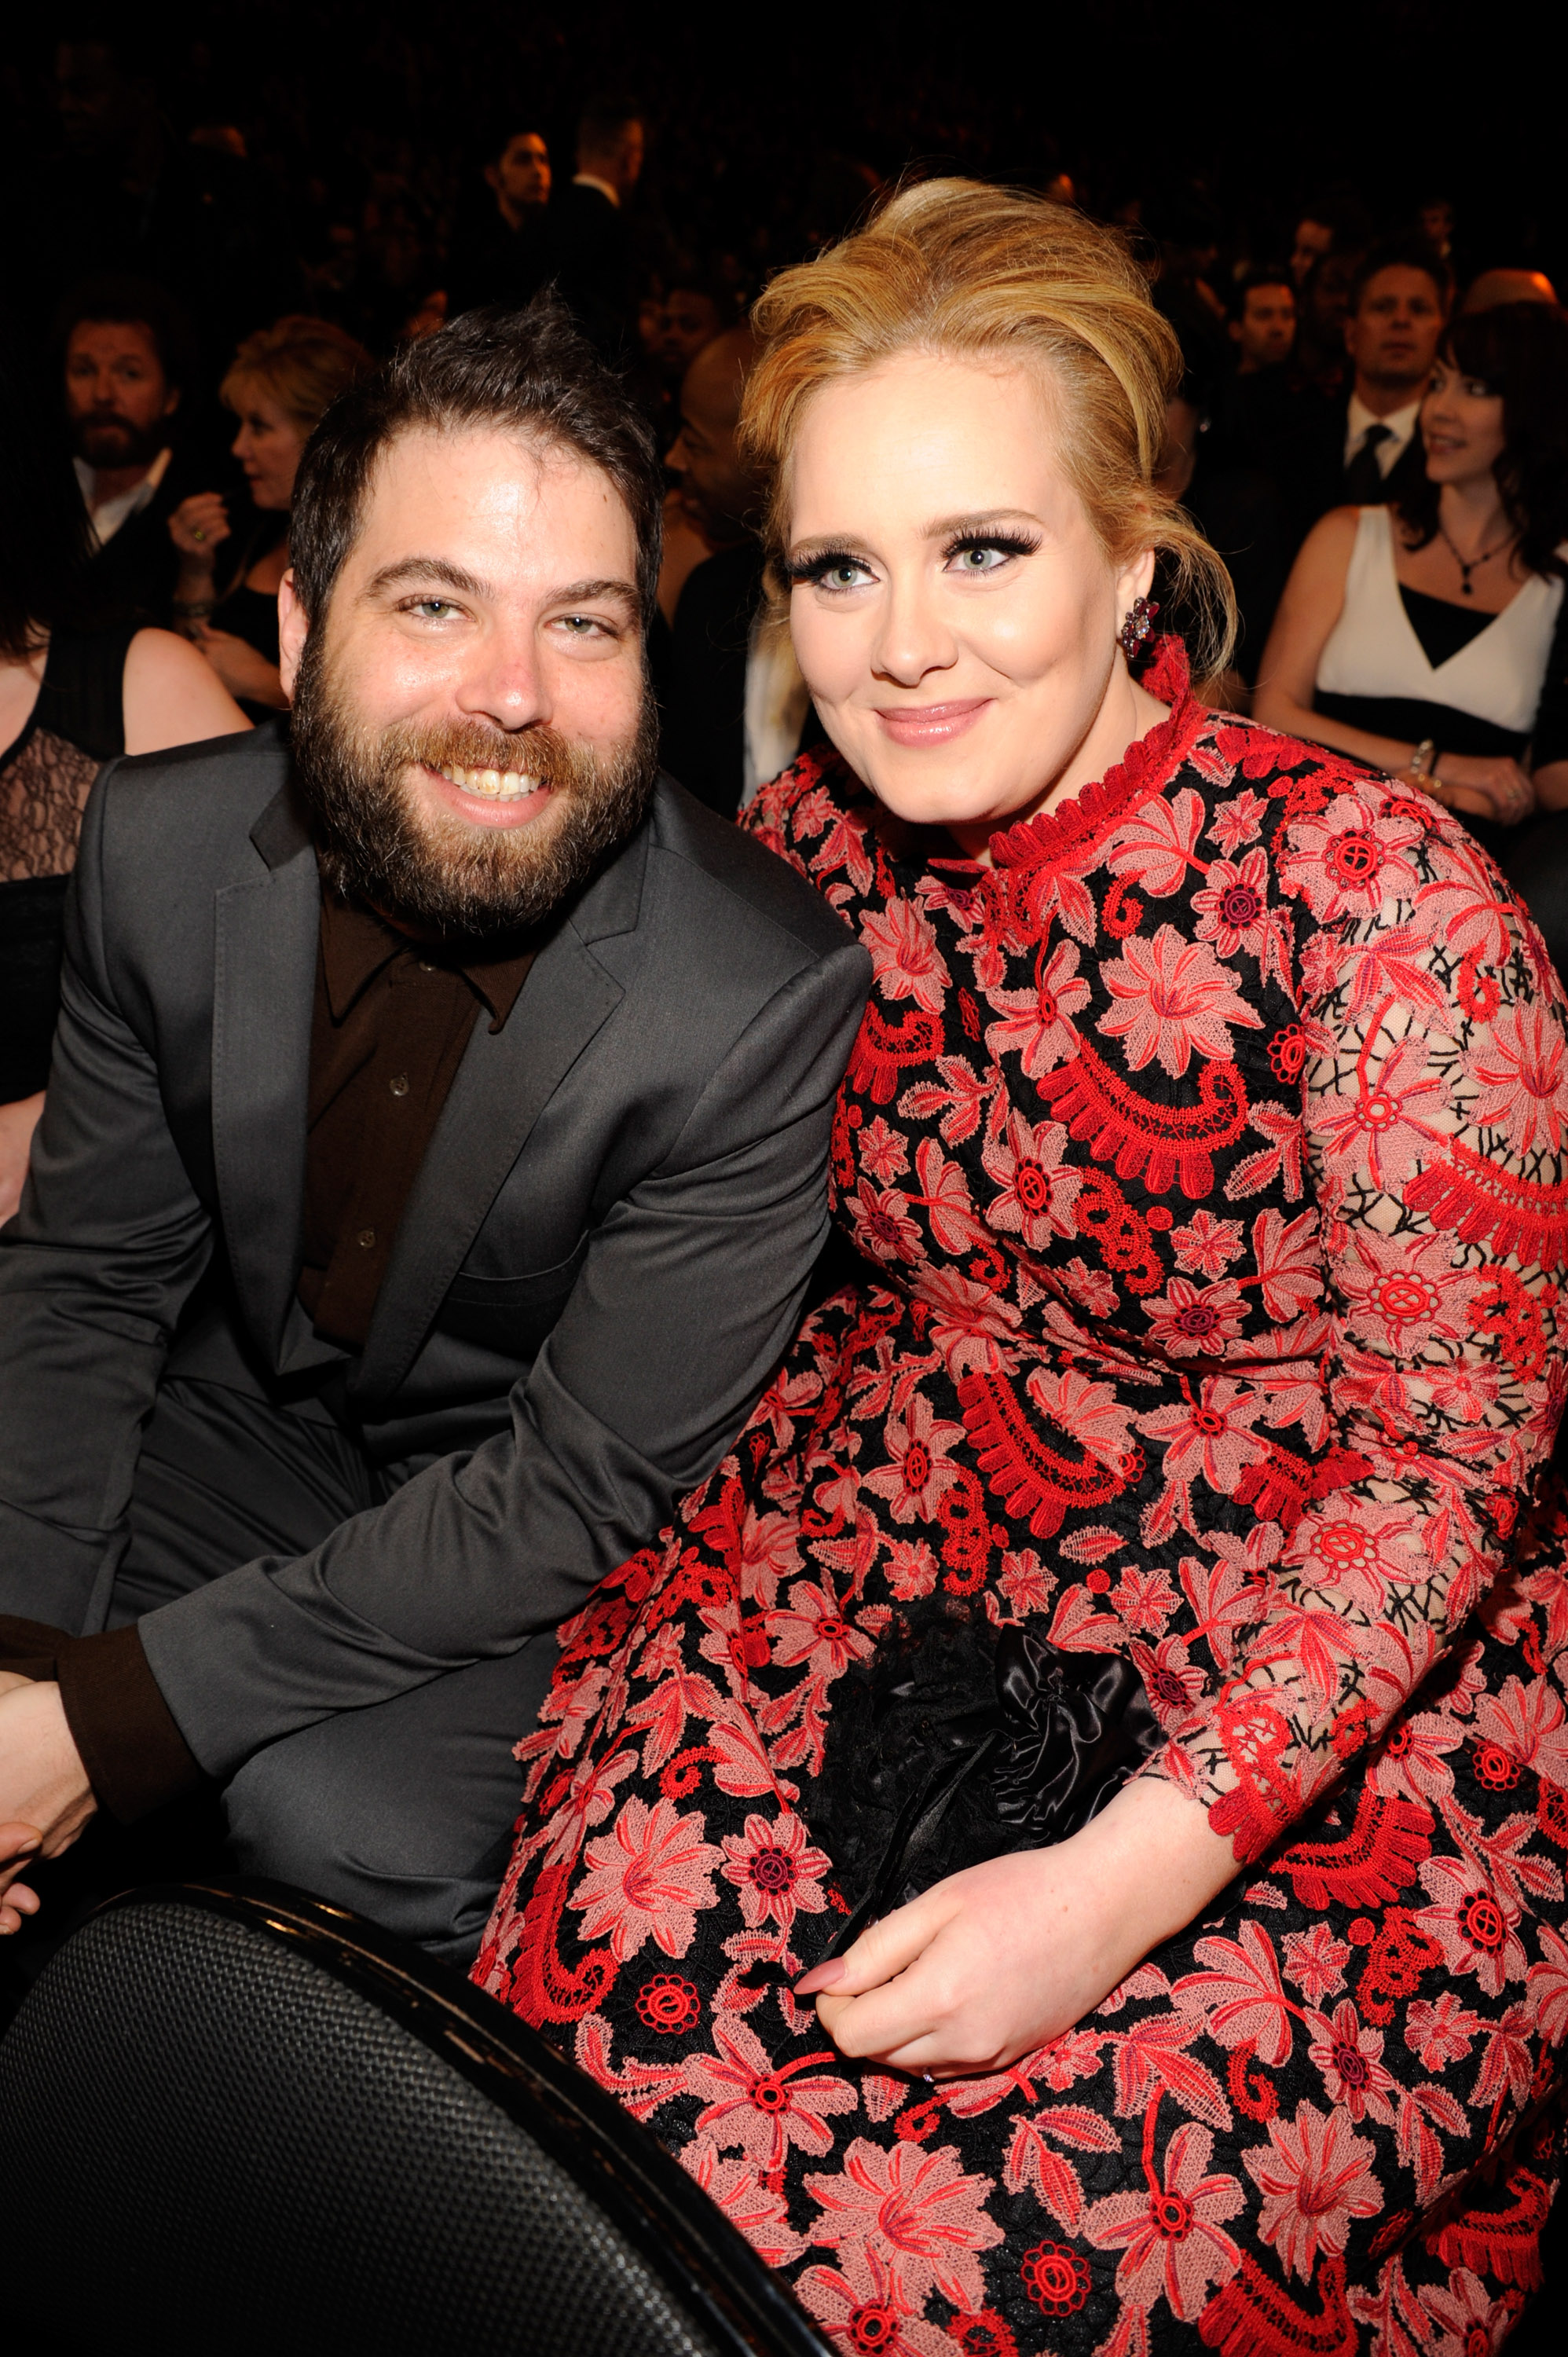 Adele and Simon Konecki on February 10, 2013 in Los Angeles, California. | Source: Getty Images